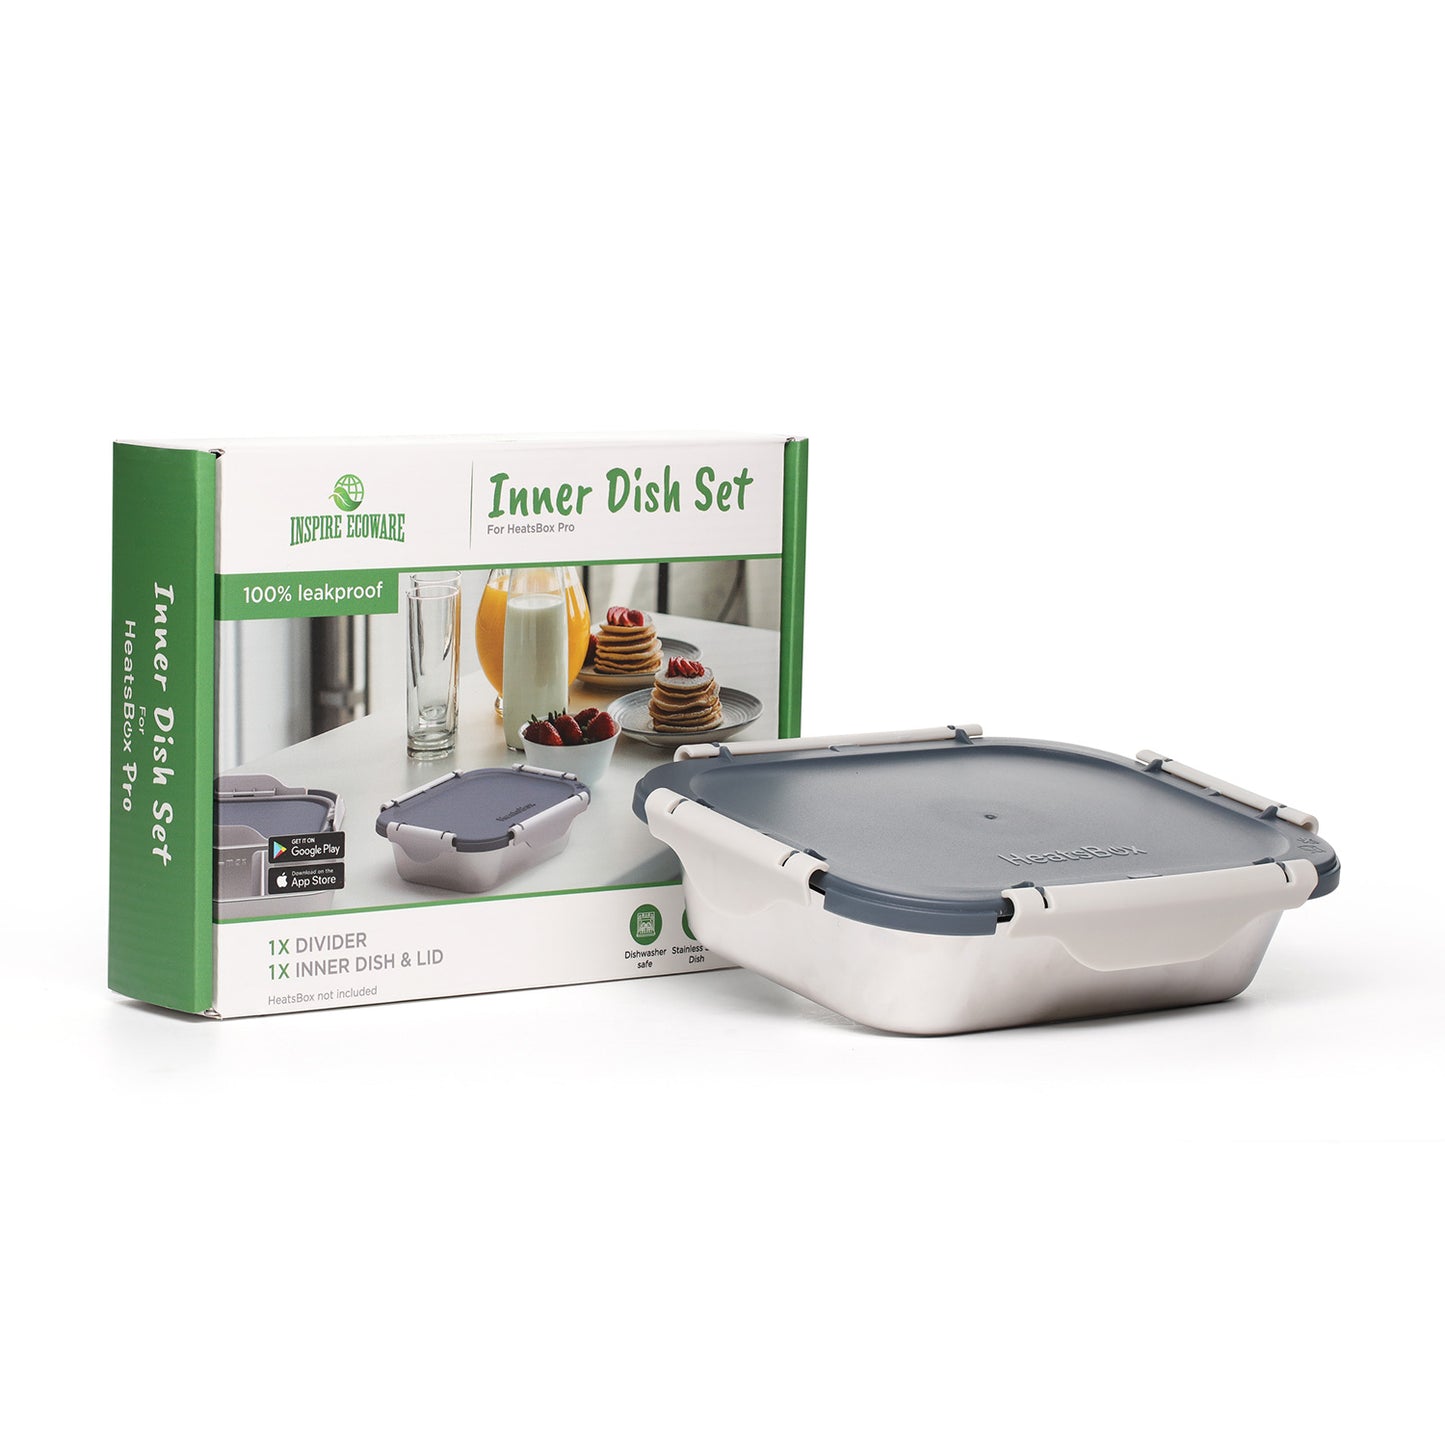 HeatsBox Go and Inner Dish Set  GADGETHEAD New Products Reviewed